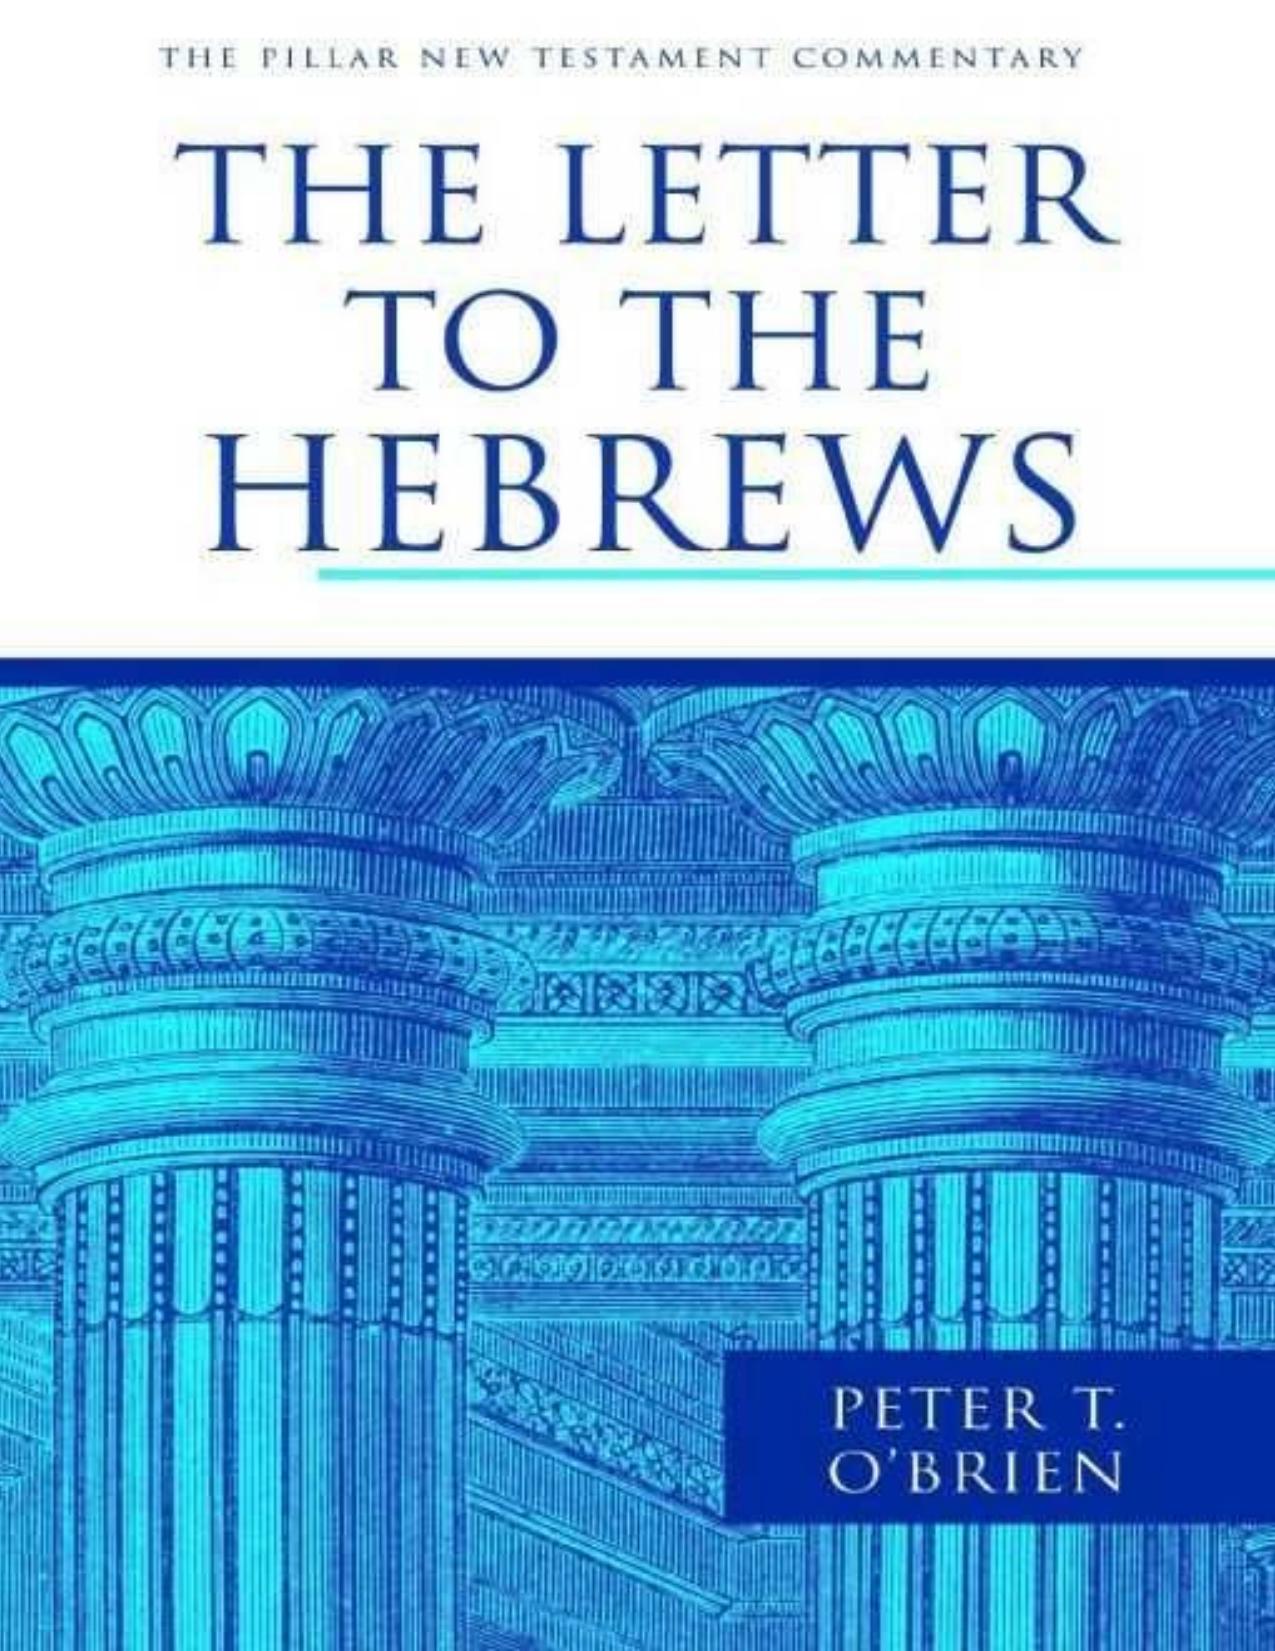 The Letter to the Hebrews \(Pillar New Testament Commentary\) - PDFDrive.com